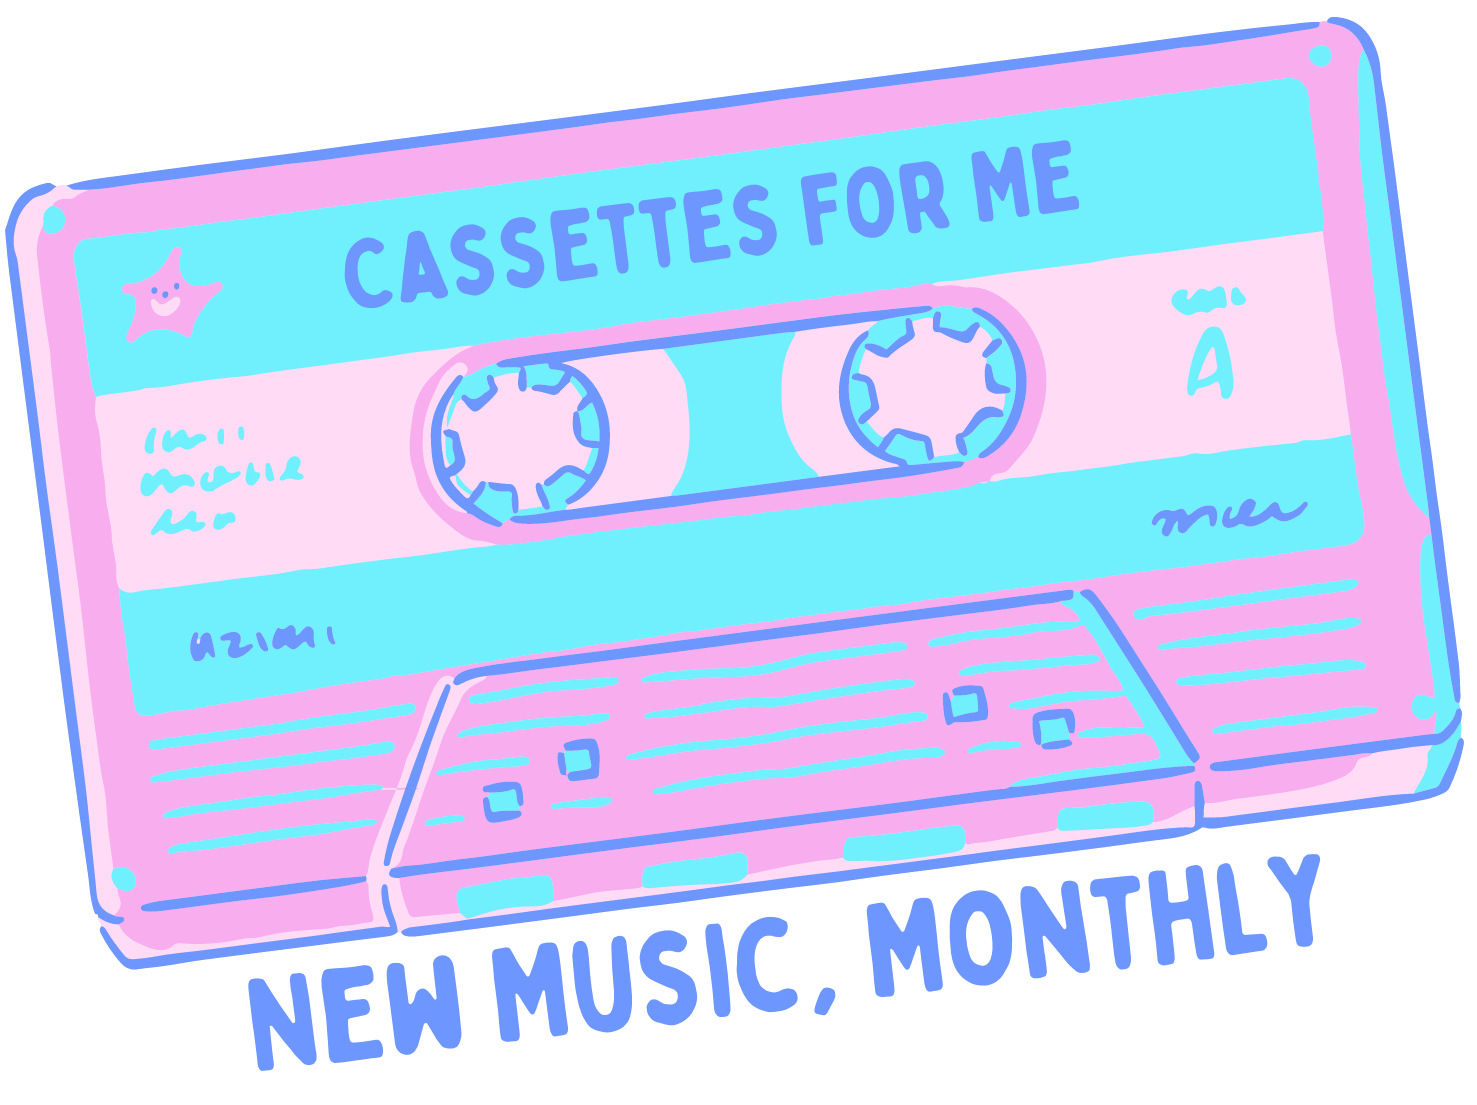 Cassettes For Me logo New Music, Monthly large image with a transparent background.